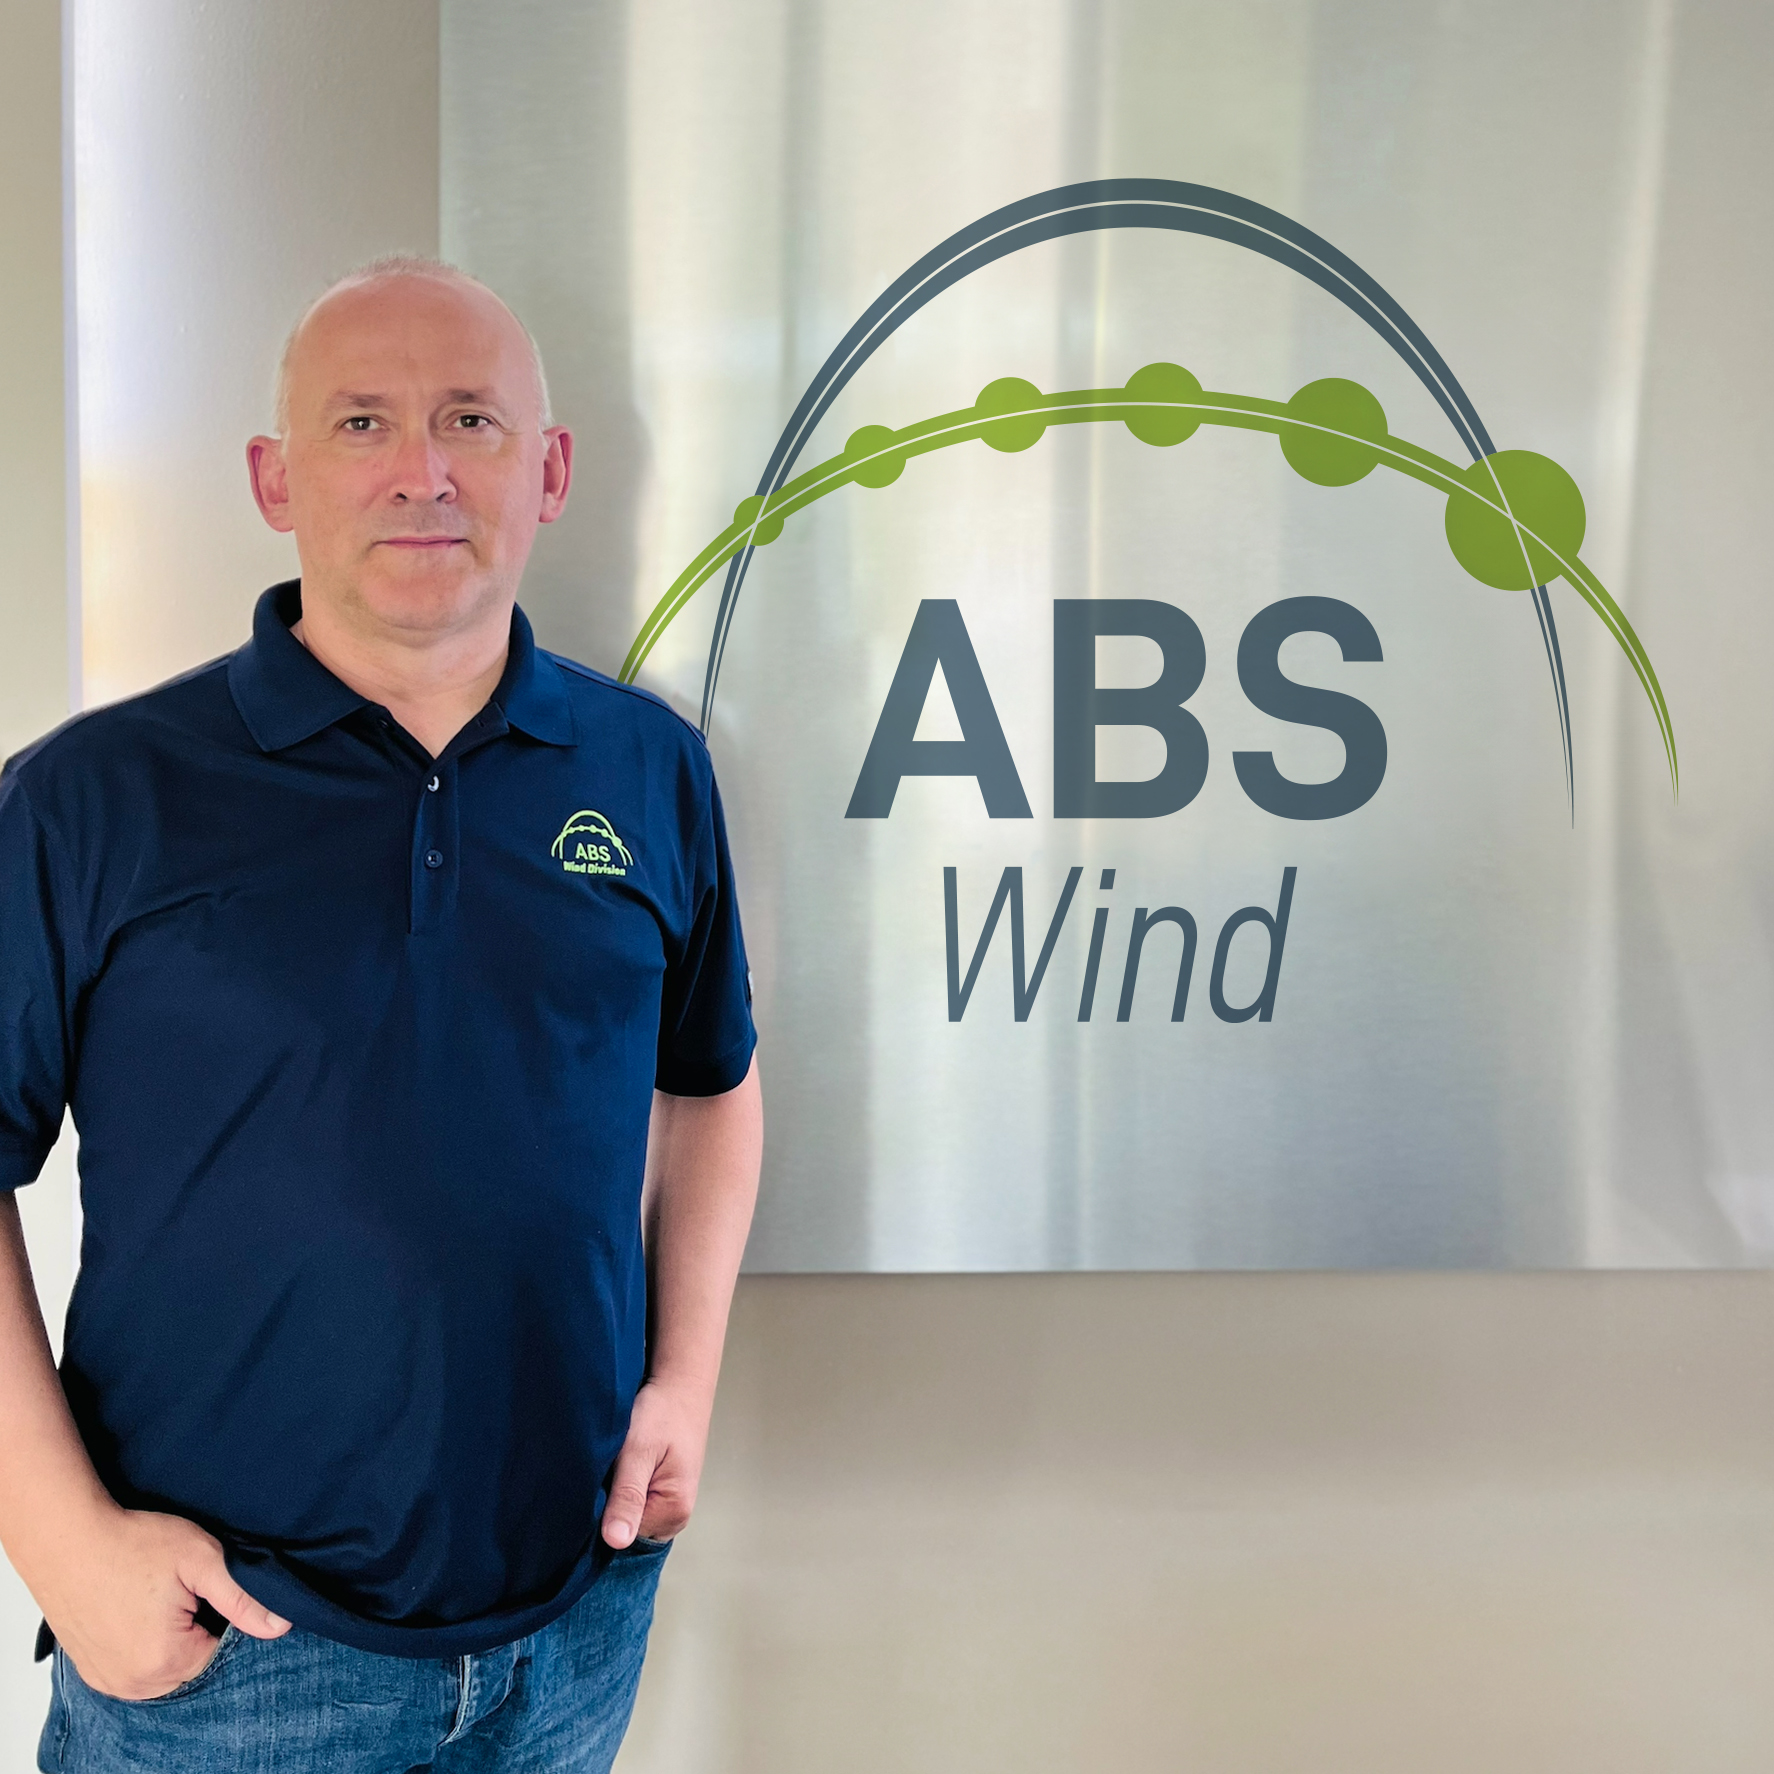 ABS Wind welcomes Andoni Irazustabarrena Lasa as new engineering manager